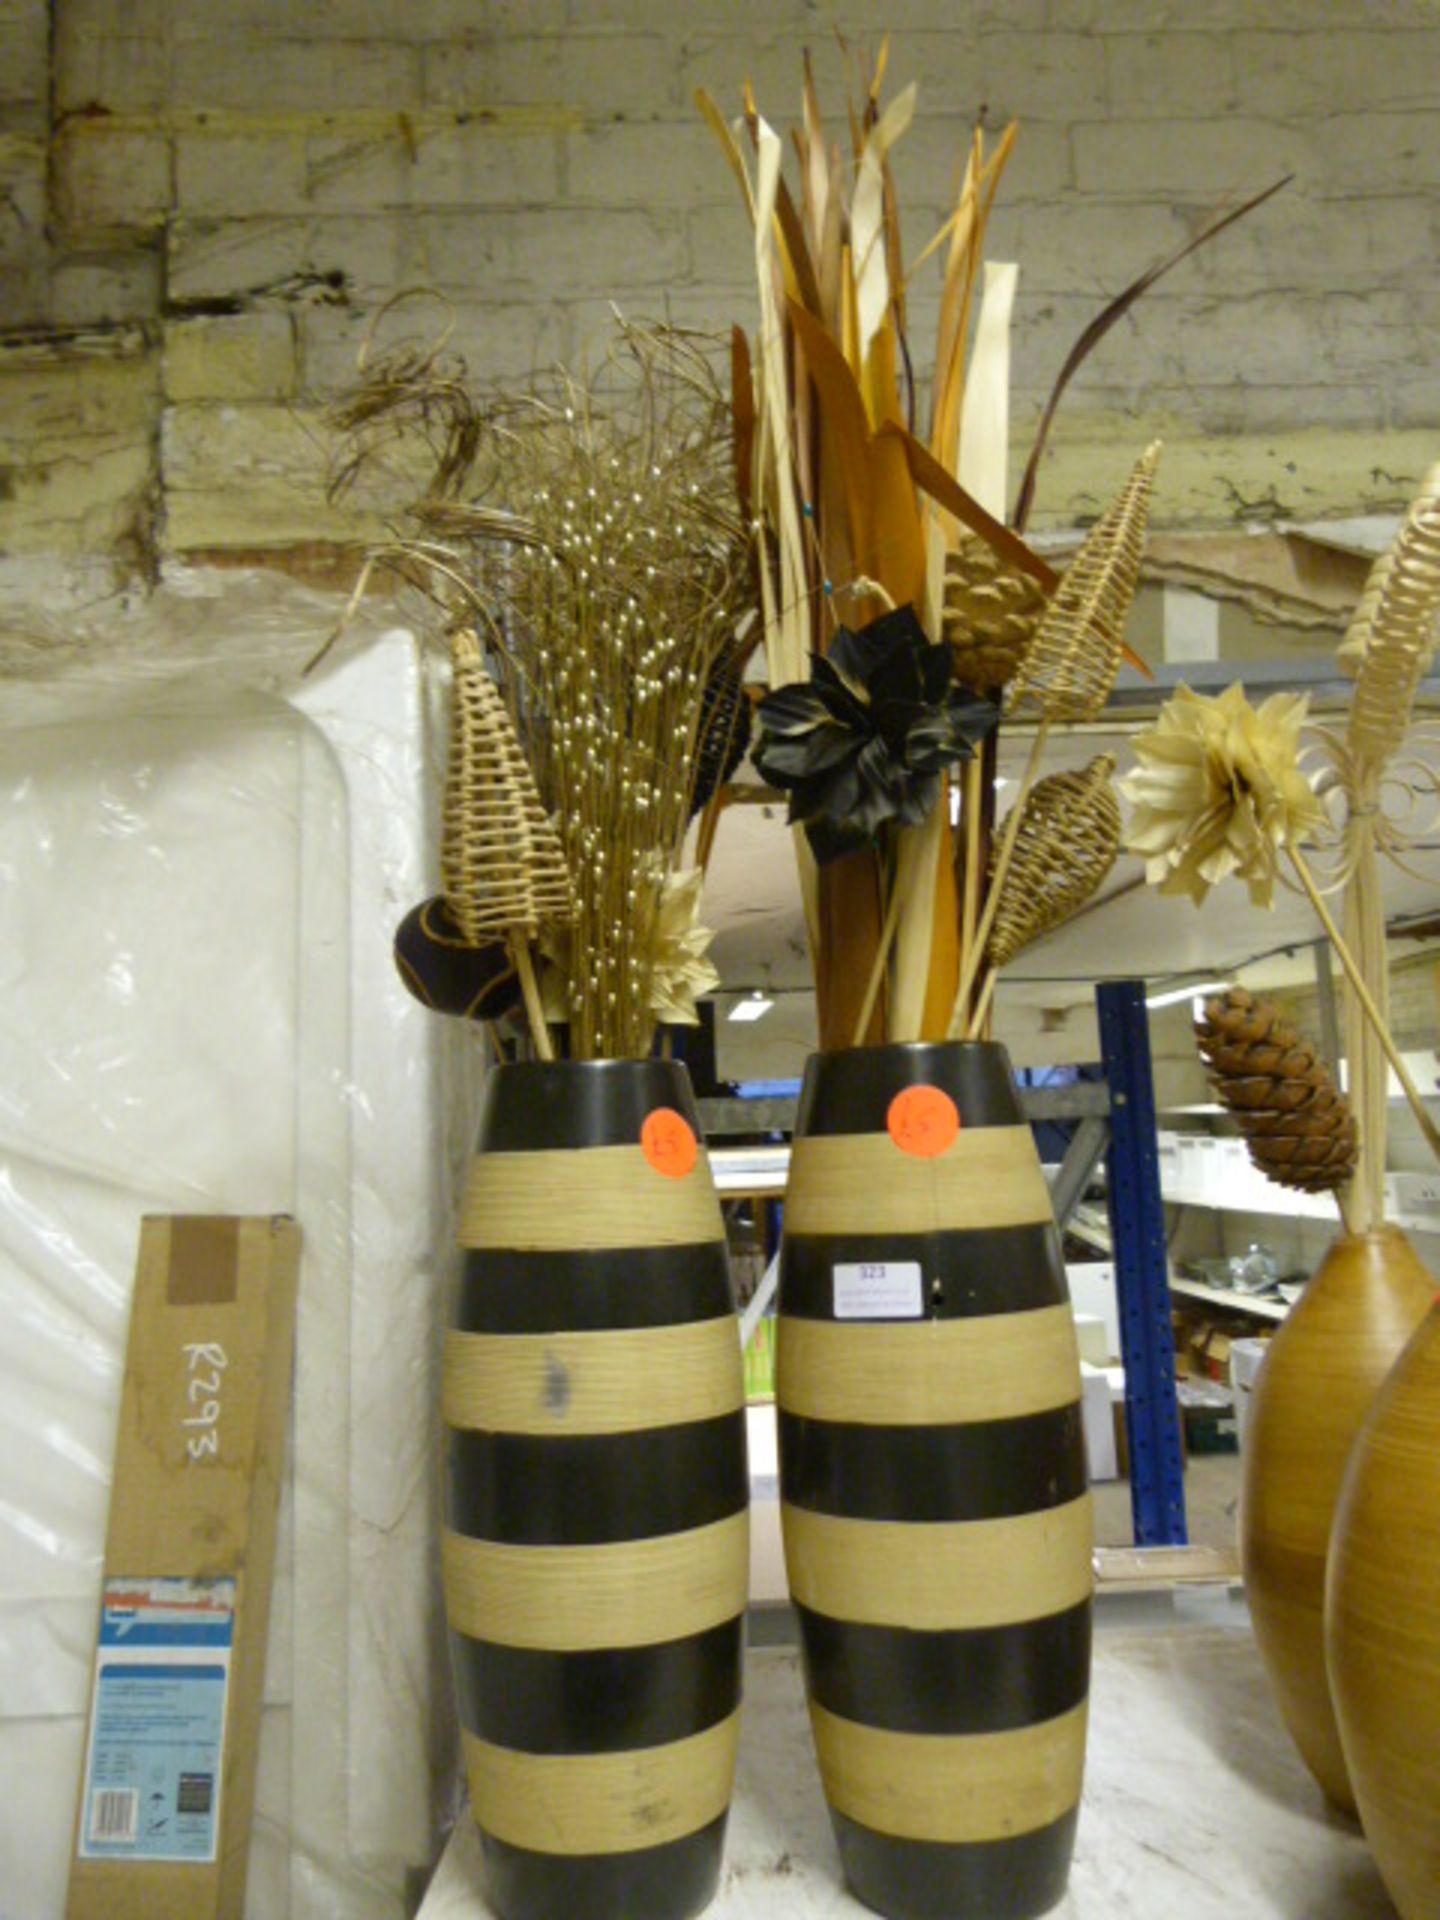 *Pair of Vases with Artificial Foliage